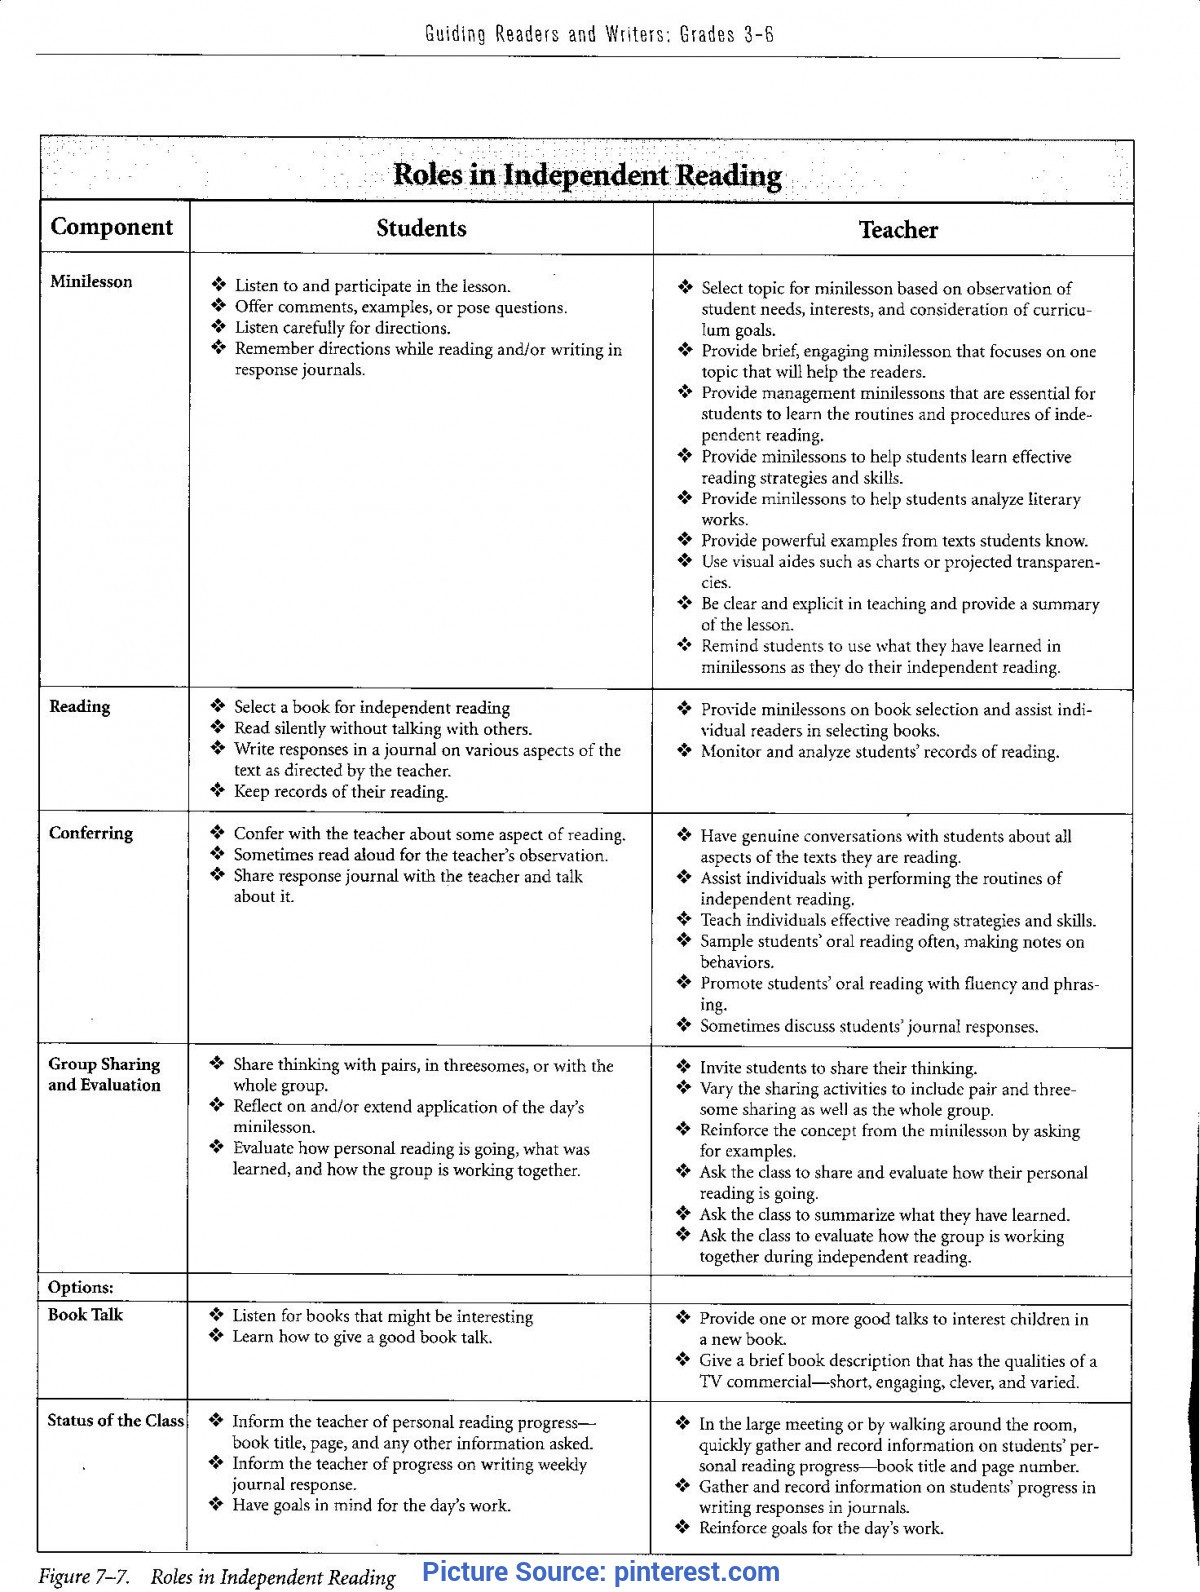 Guided Reading Lesson Plan Template Plex Guided Reading Lesson Plan Template for 3rd Grade